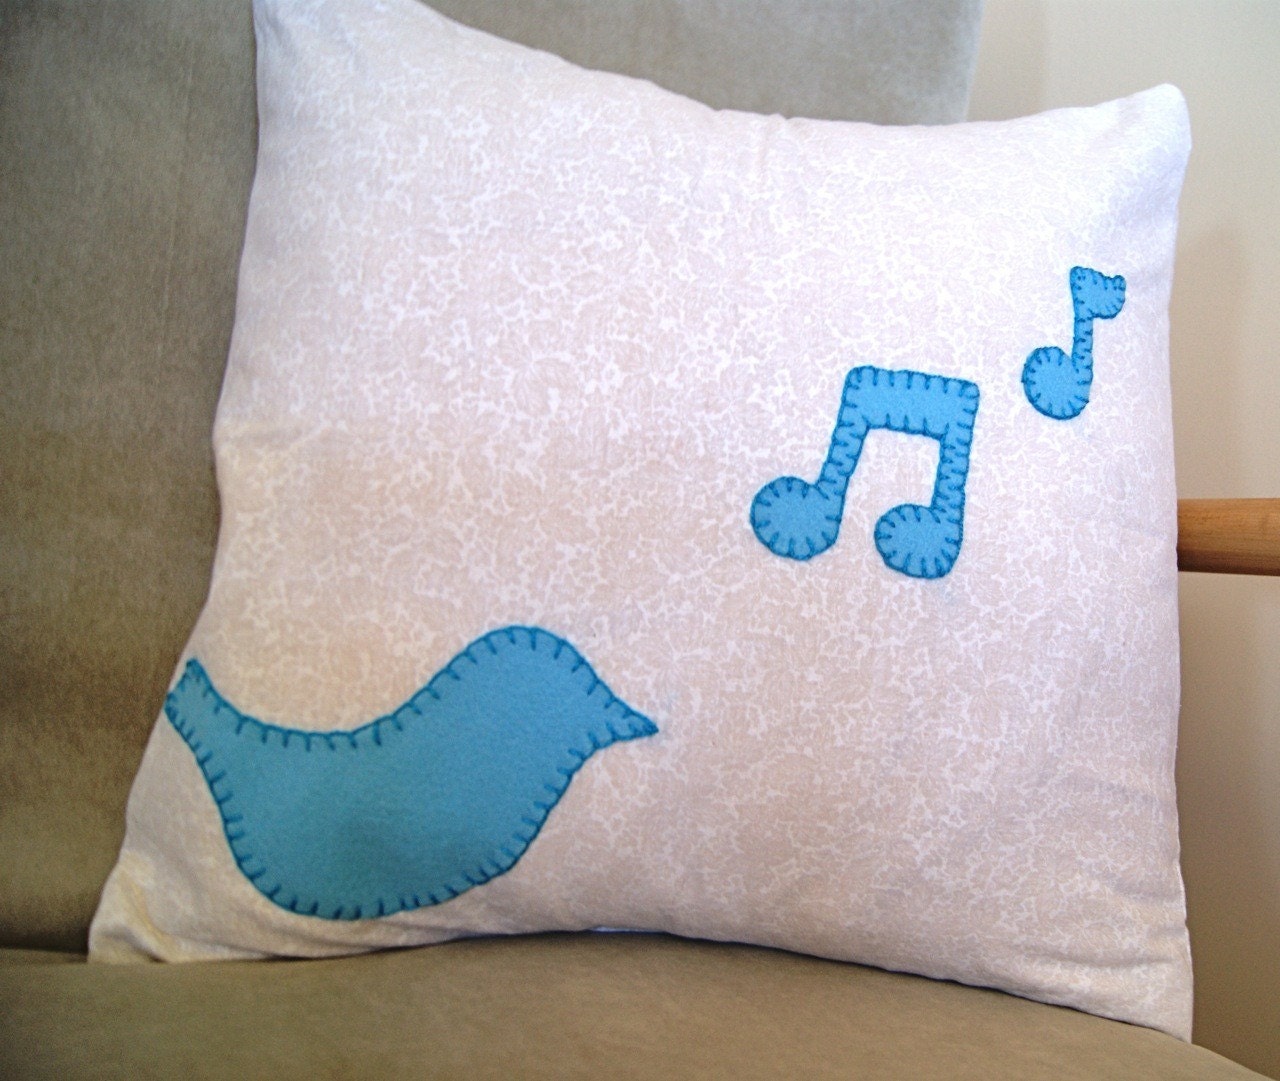 Bluebird Singing Pillow Cover, 16 by 16 inch by newleafhandmade on Etsy